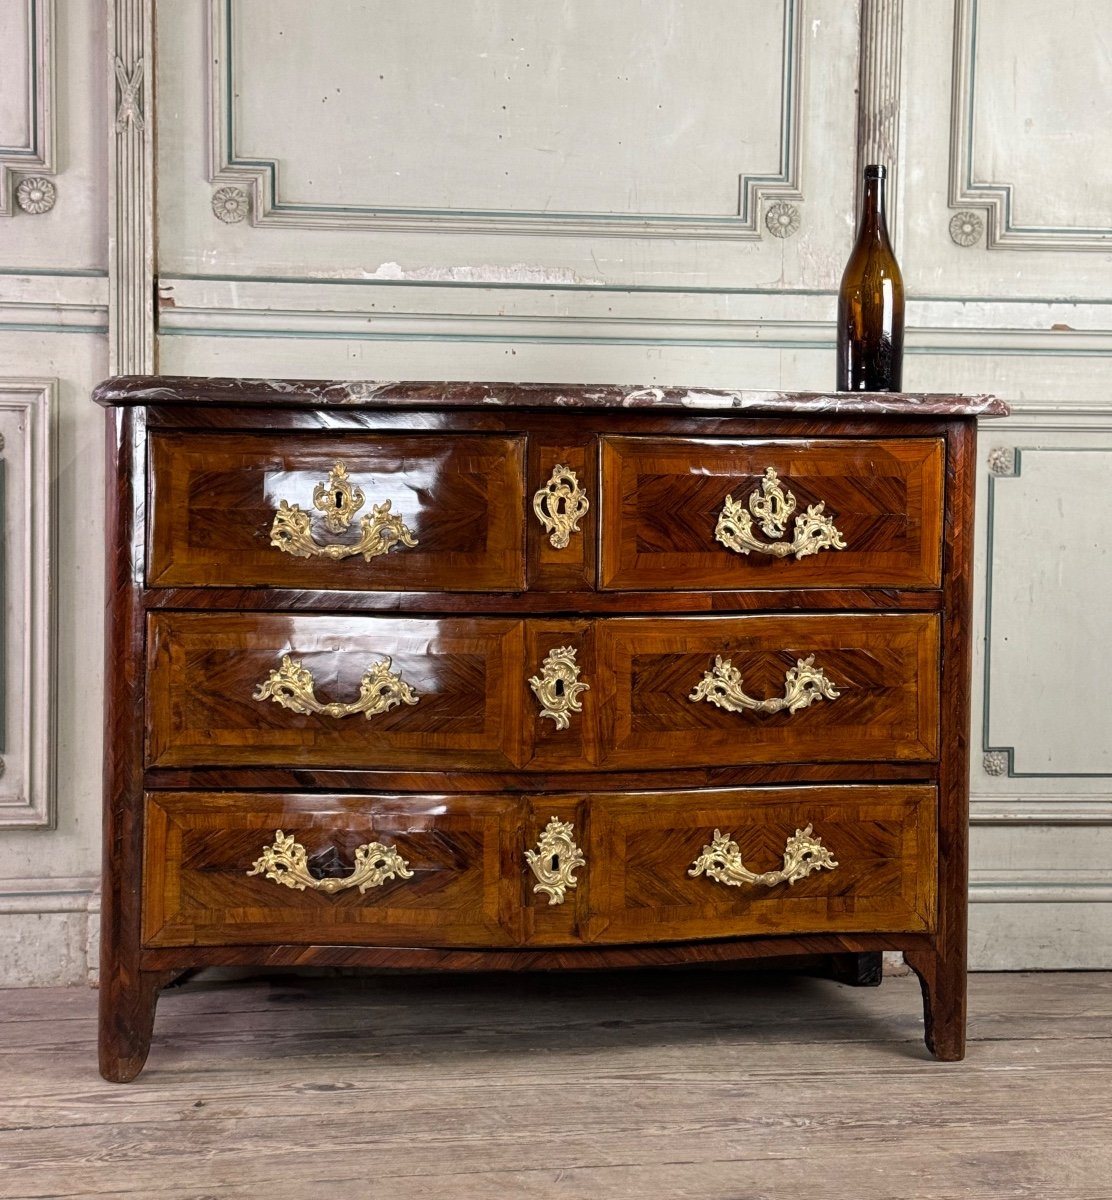 Louis XV Commode In Veneer And Gilded Bronzes, Rance Marble, 18th Century -photo-1